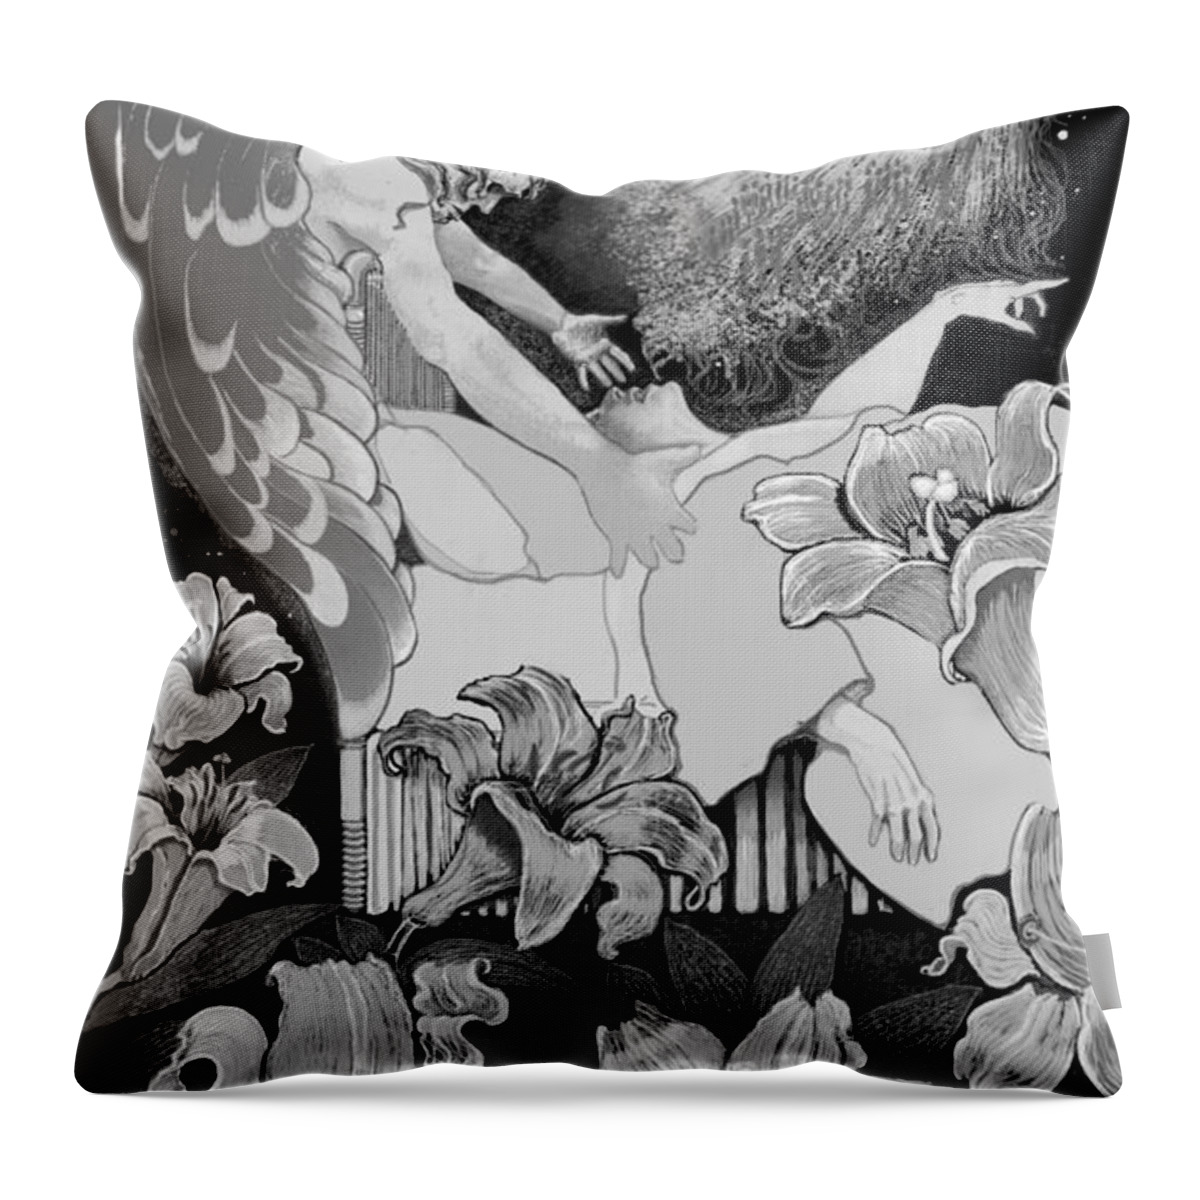 Angel Throw Pillow featuring the digital art Angel of Death Vision by Carol Jacobs